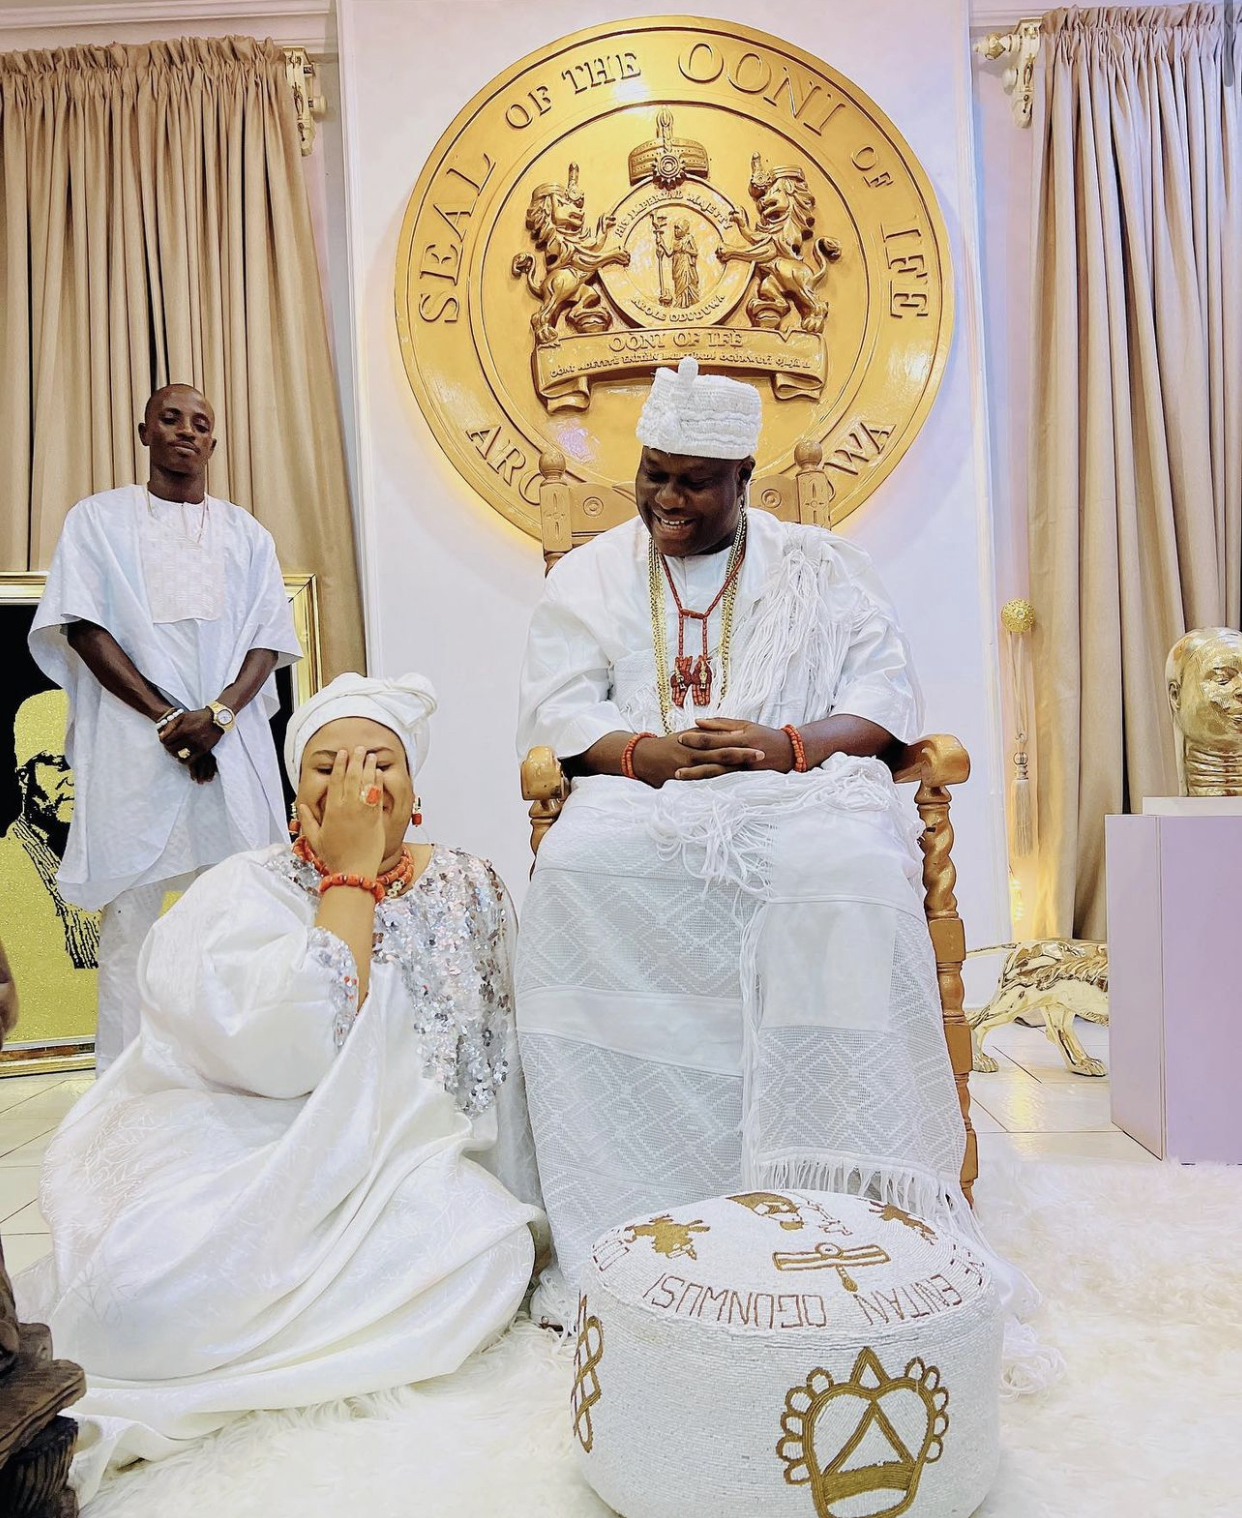 Actress, Nkechi Blessing one step closer; blushes hard as she finally meets Ooni of Ife